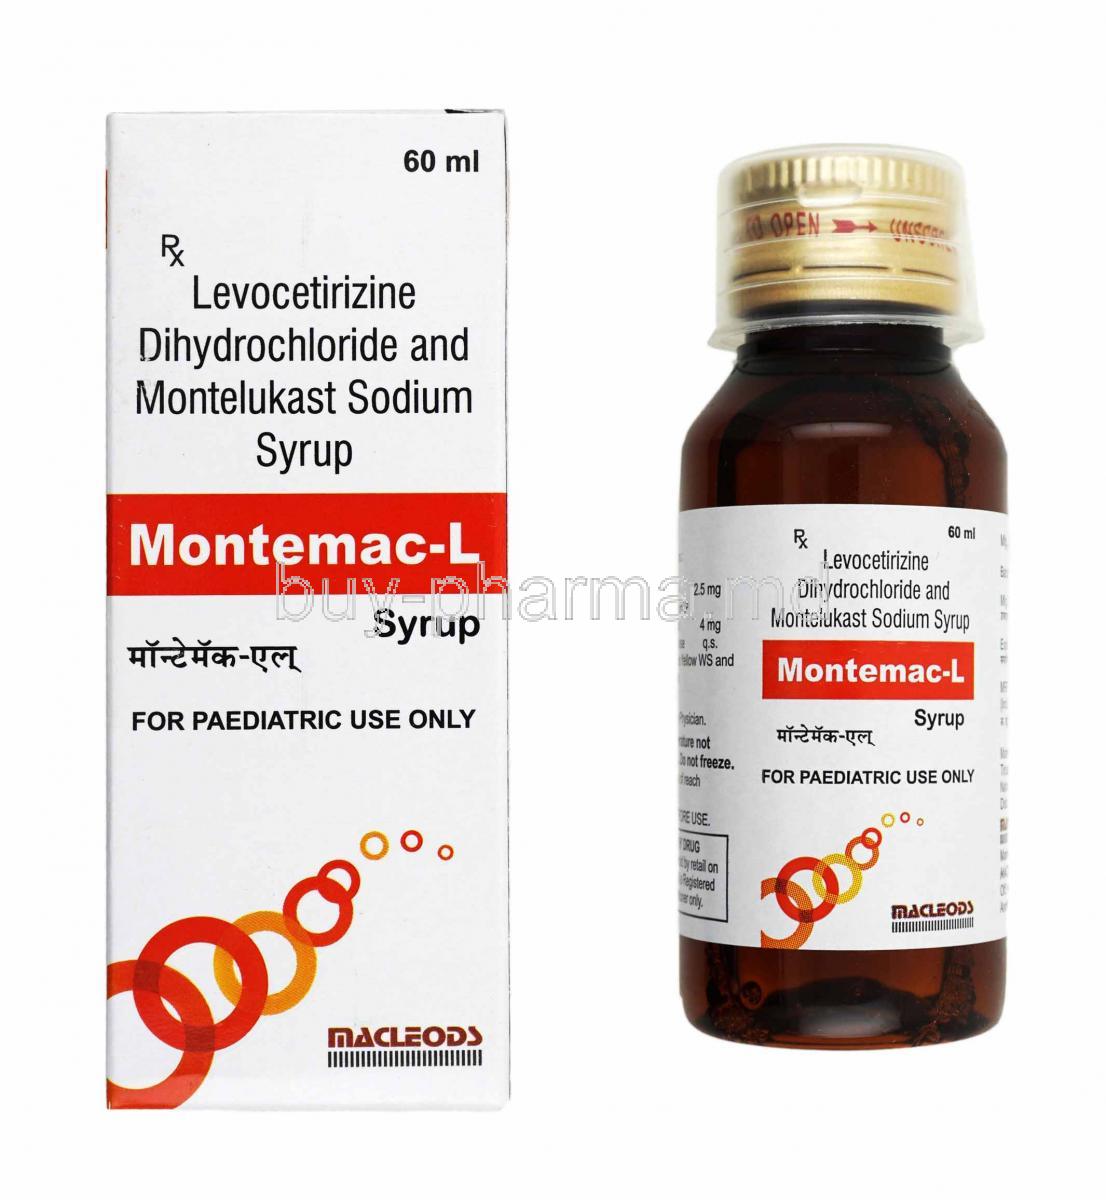 Montemac-L Syrup, Levocetirizine and Montelukast box and bottle